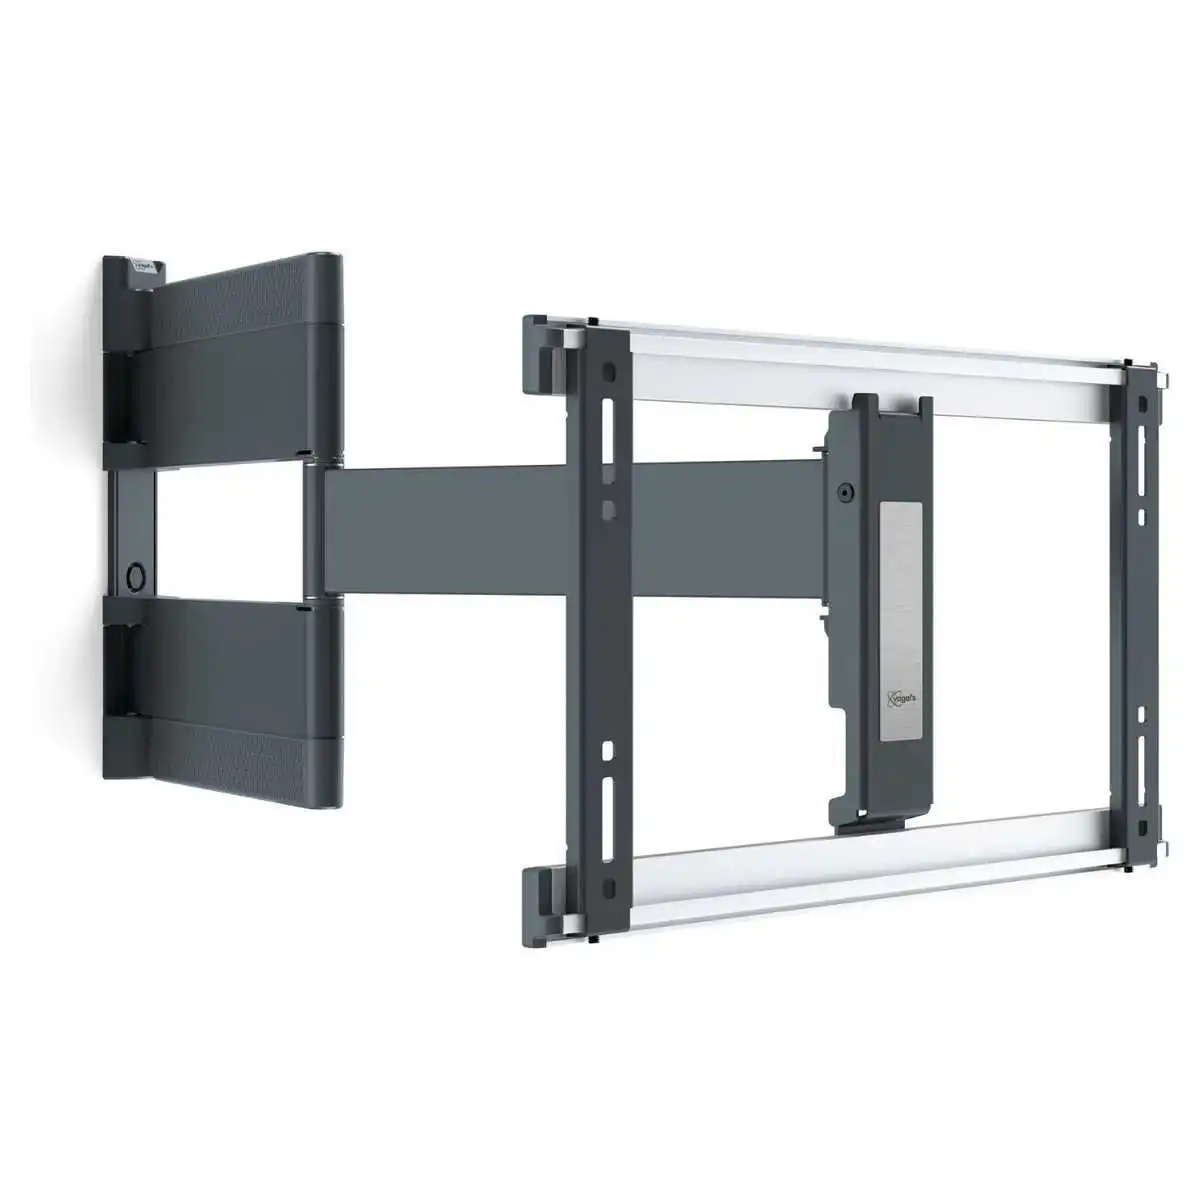 Vogel's Extra Thin Full Motion TV Wall Mount For 40 to 65 Inch OLED TVs